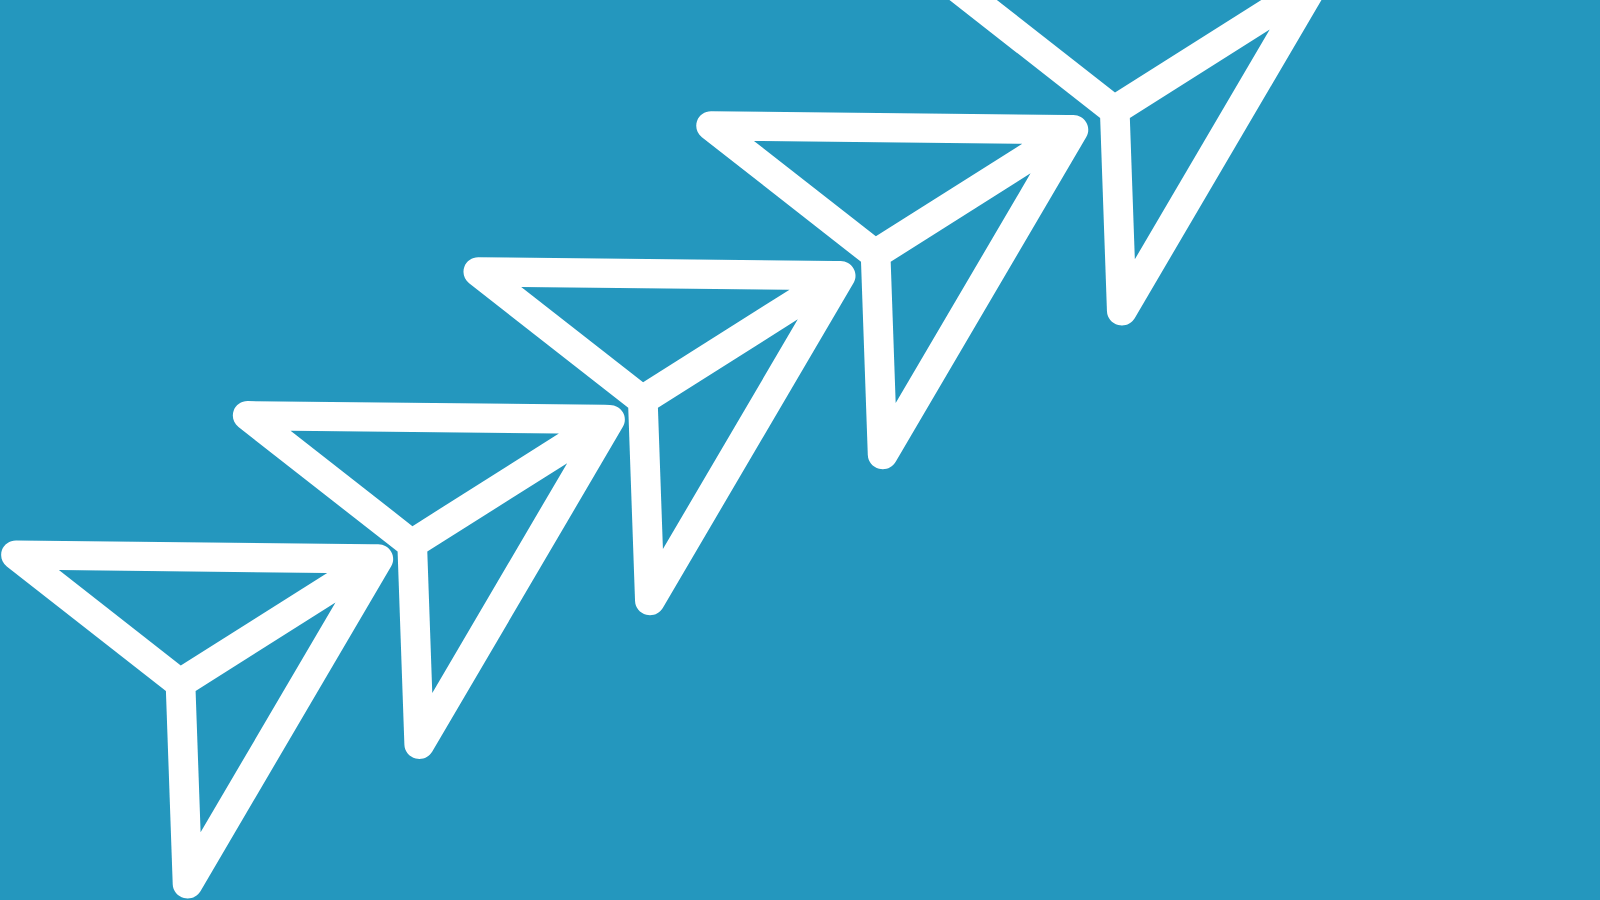 A paper airplane icon